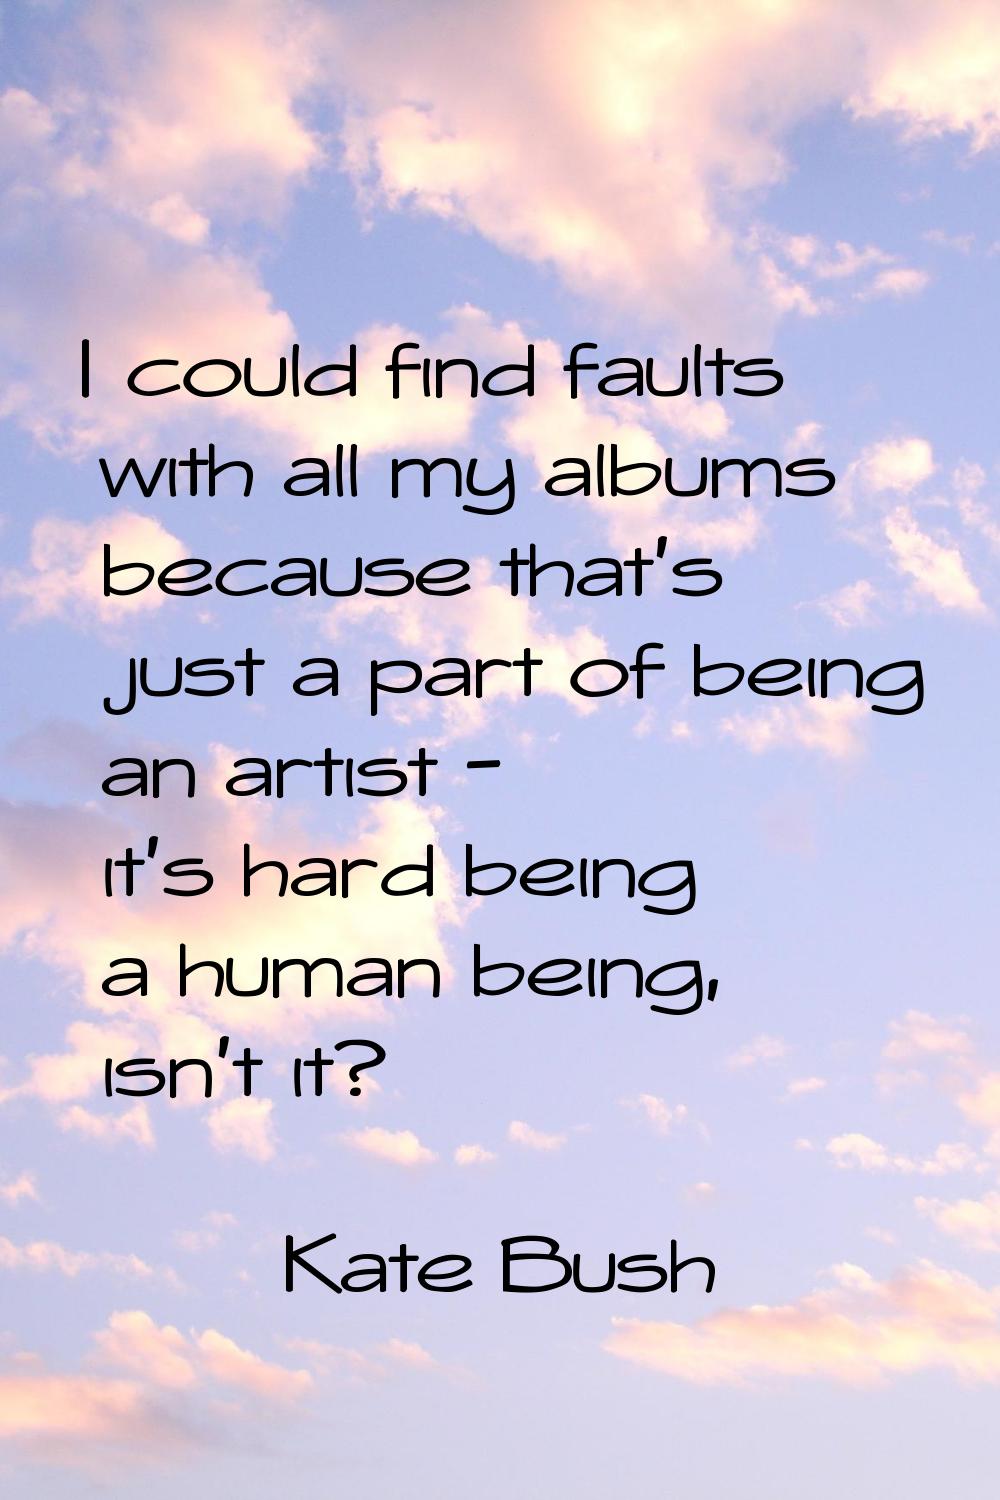 I could find faults with all my albums because that's just a part of being an artist - it's hard be